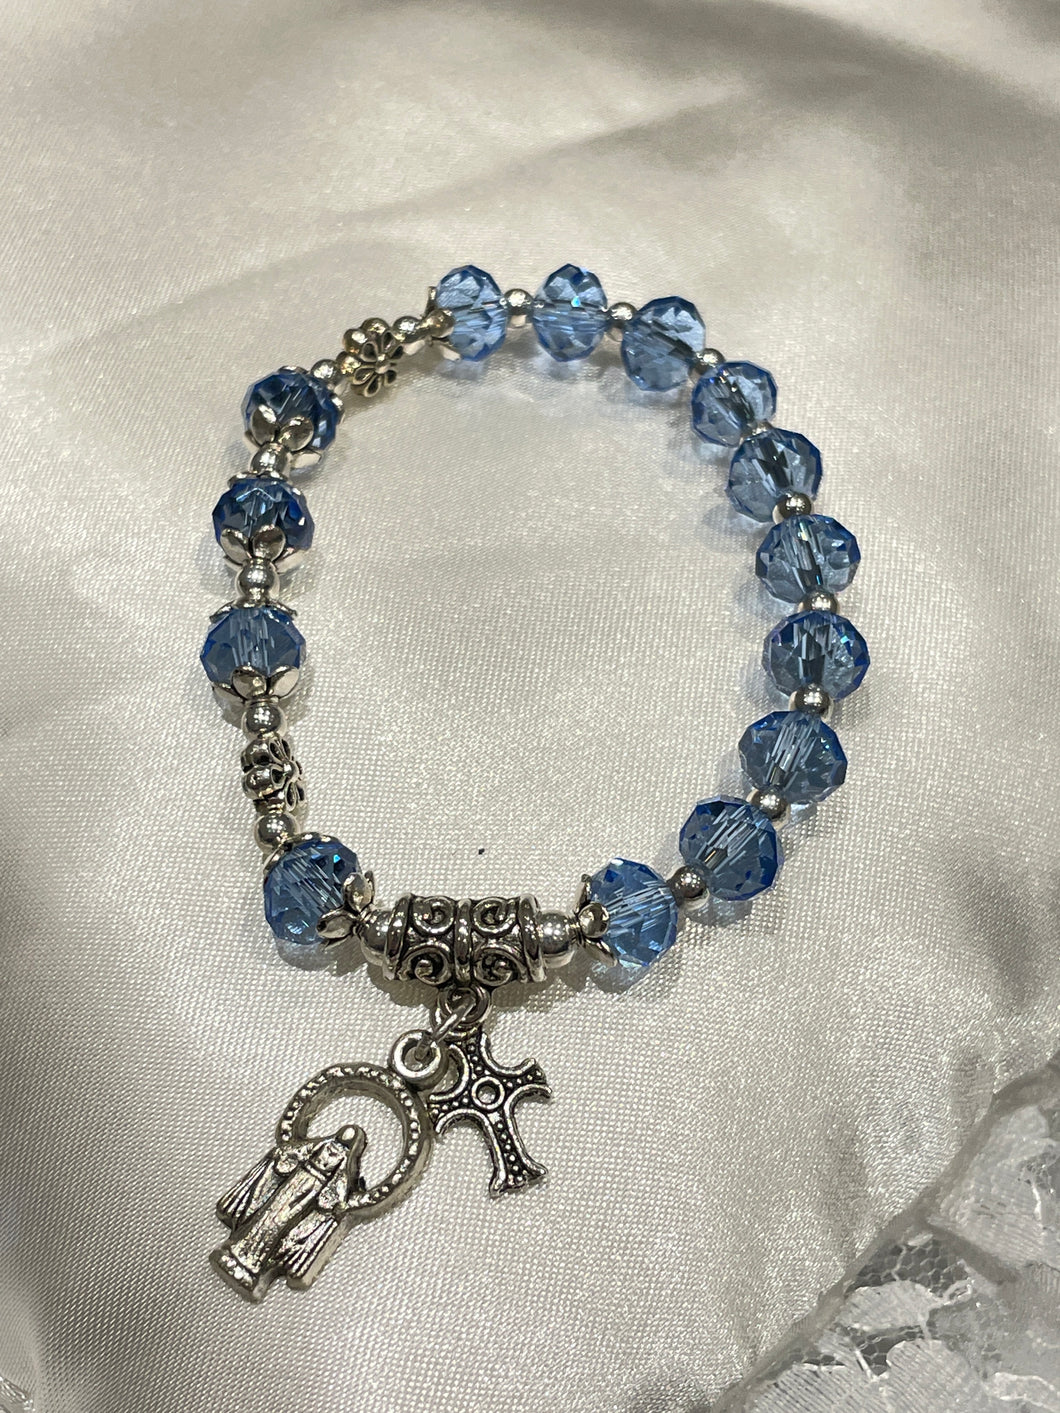 Blue Crystal Rosary Bracelet with Our Lady of Grace and Cross Charms